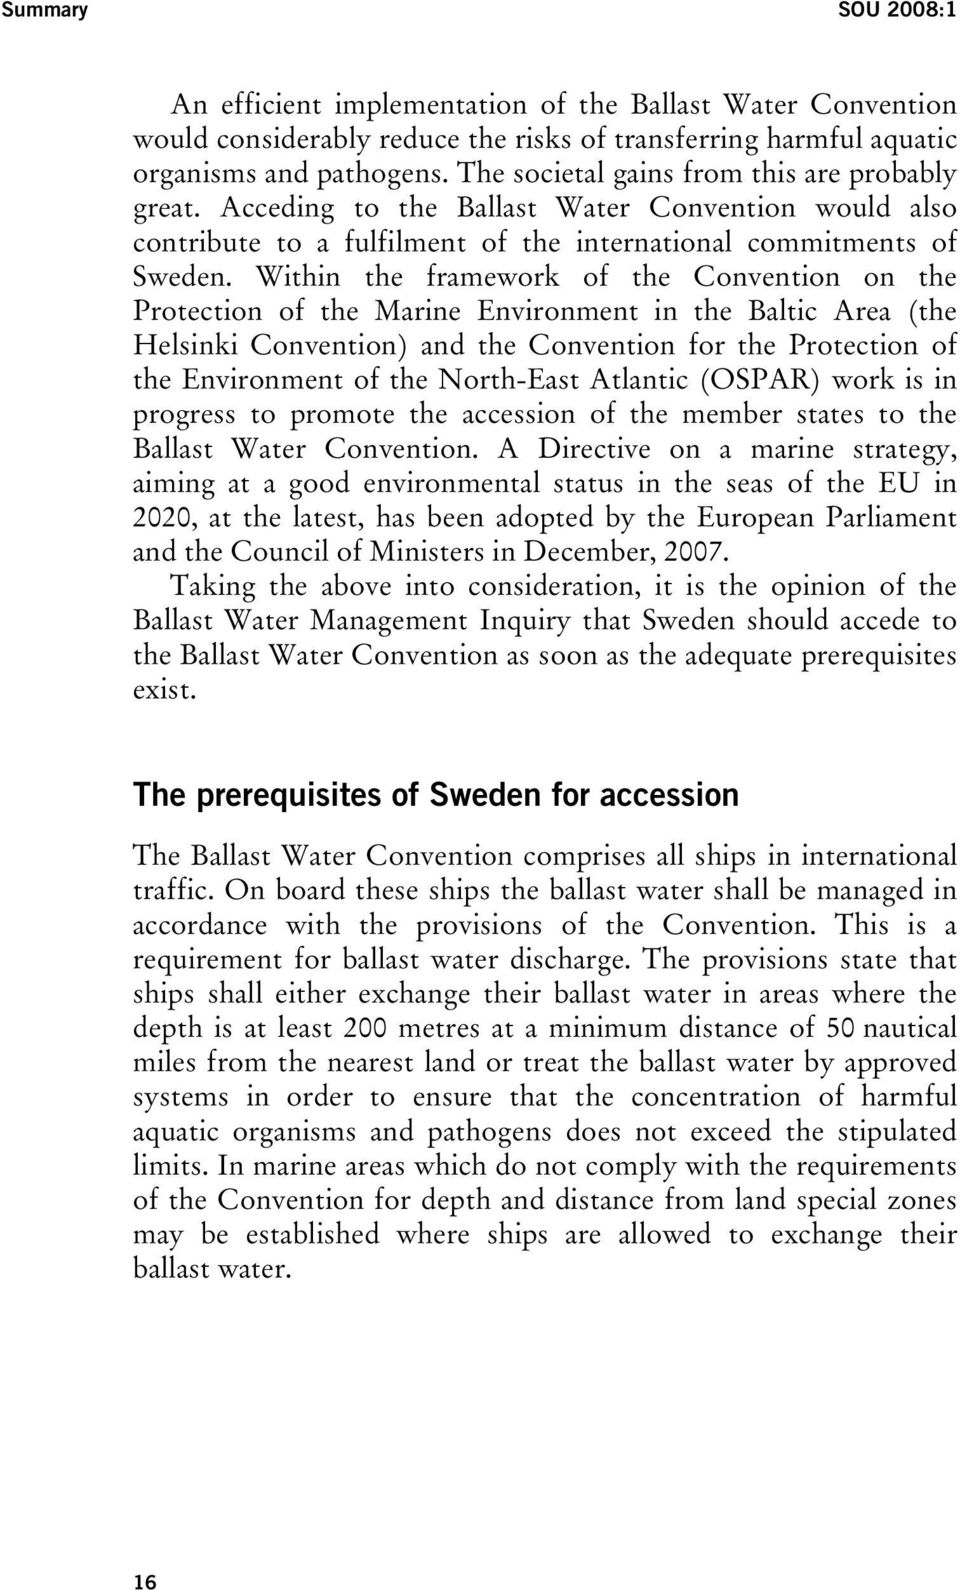 Within the framework of the Convention on the Protection of the Marine Environment in the Baltic Area (the Helsinki Convention) and the Convention for the Protection of the Environment of the